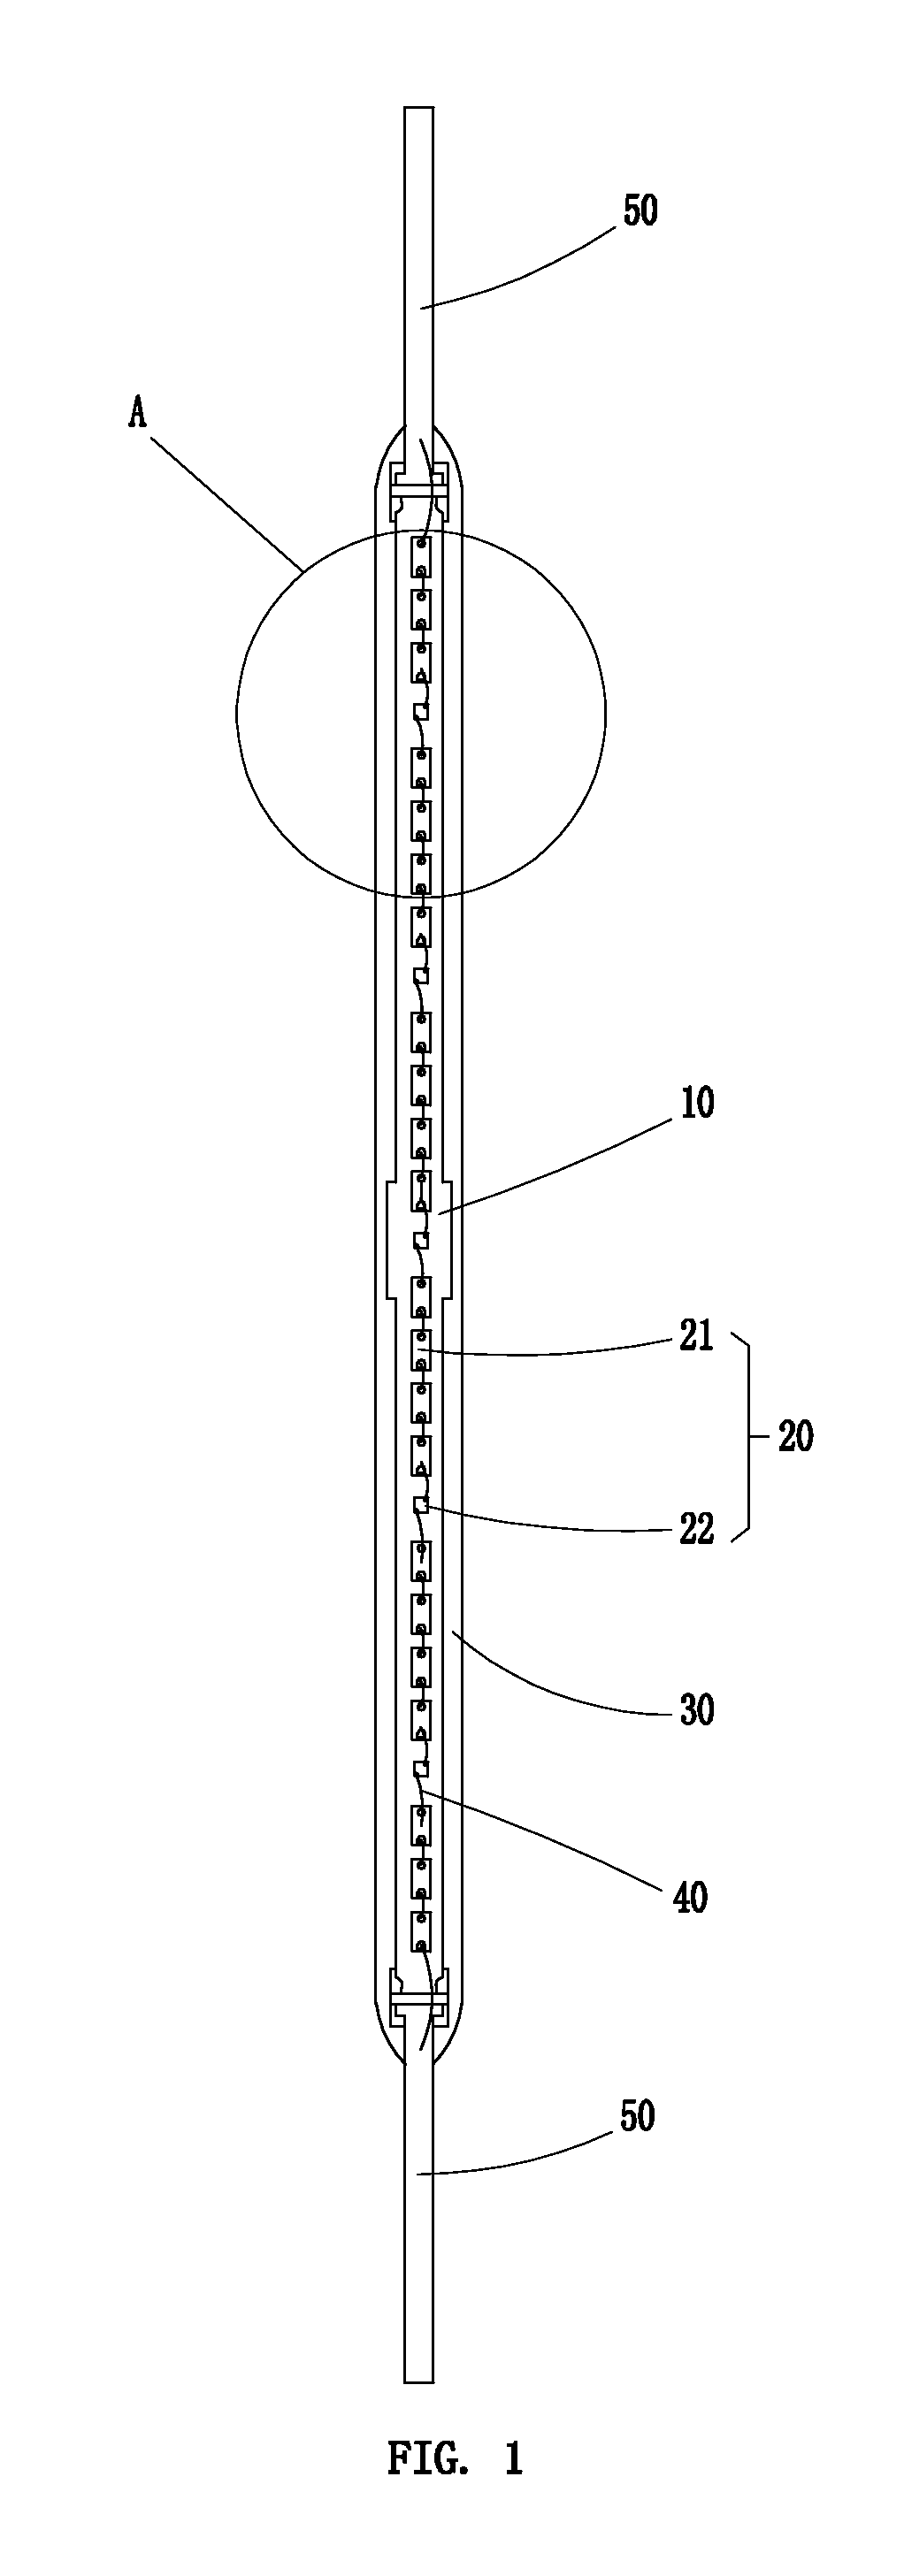 LED light and filament thereof